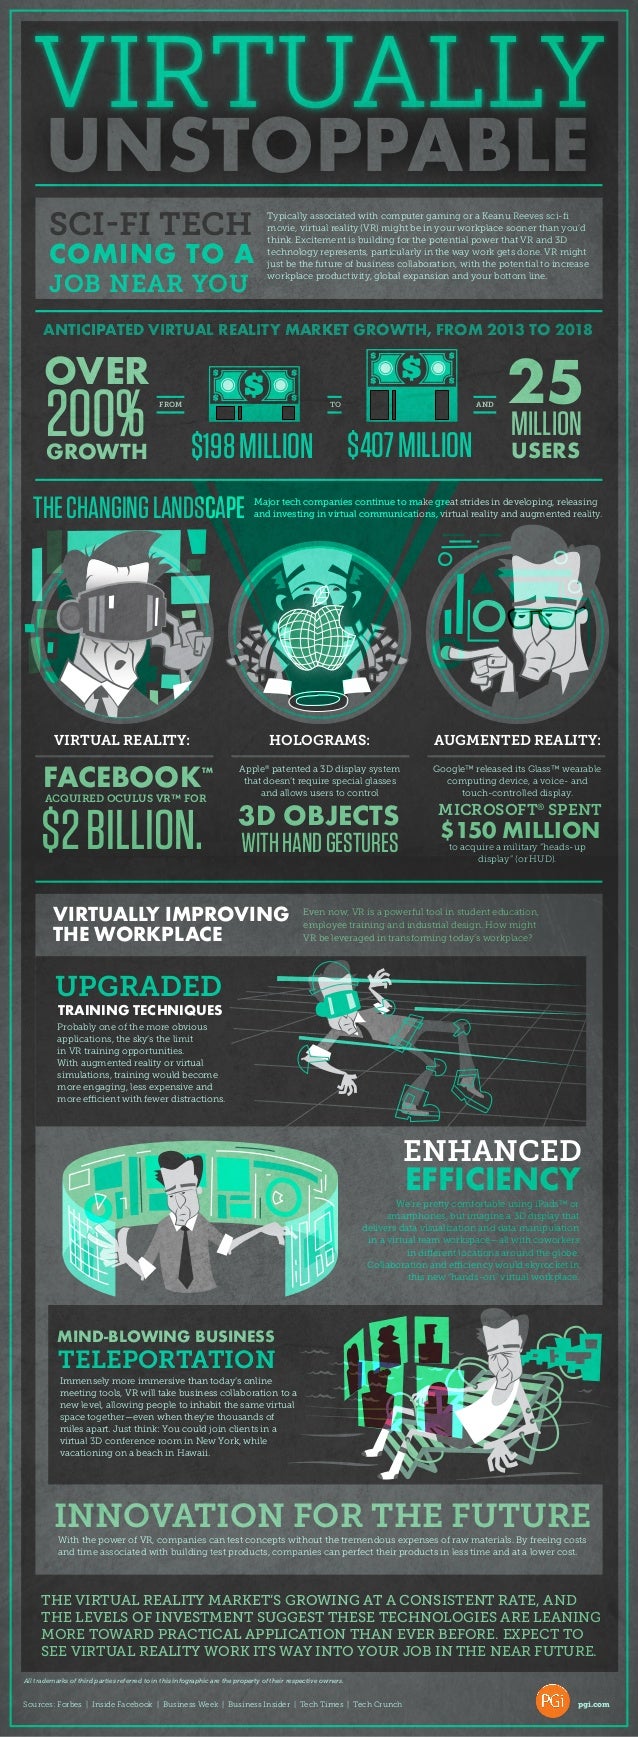 infographic-is-virtual-reality-technology-the-future-of-work-1-638.jpg